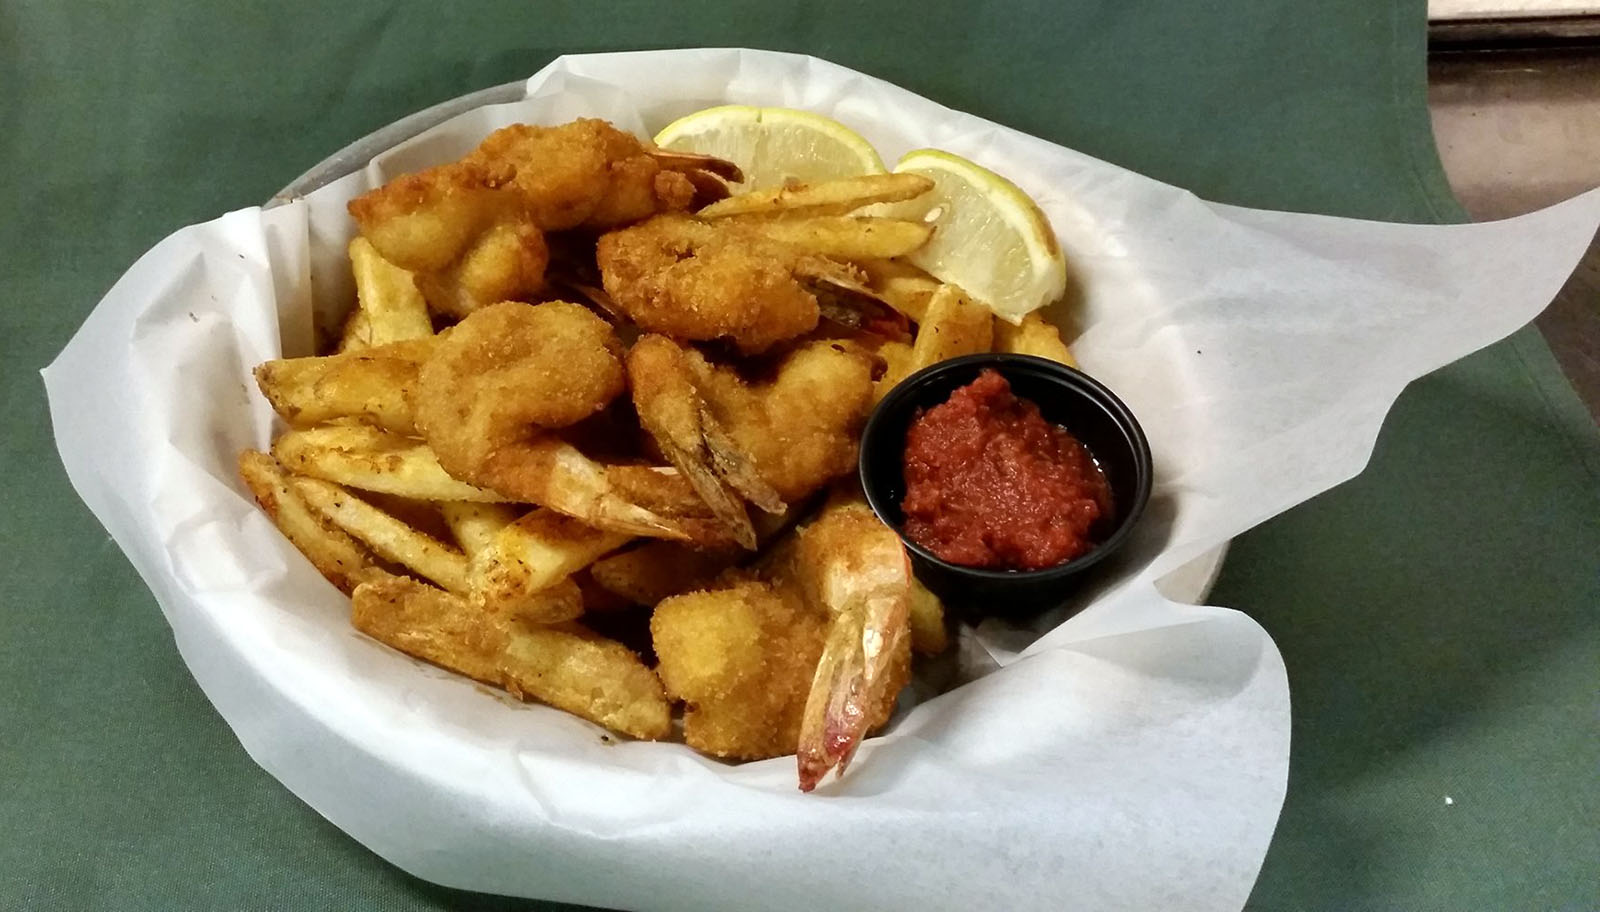 Shrimp and Chips